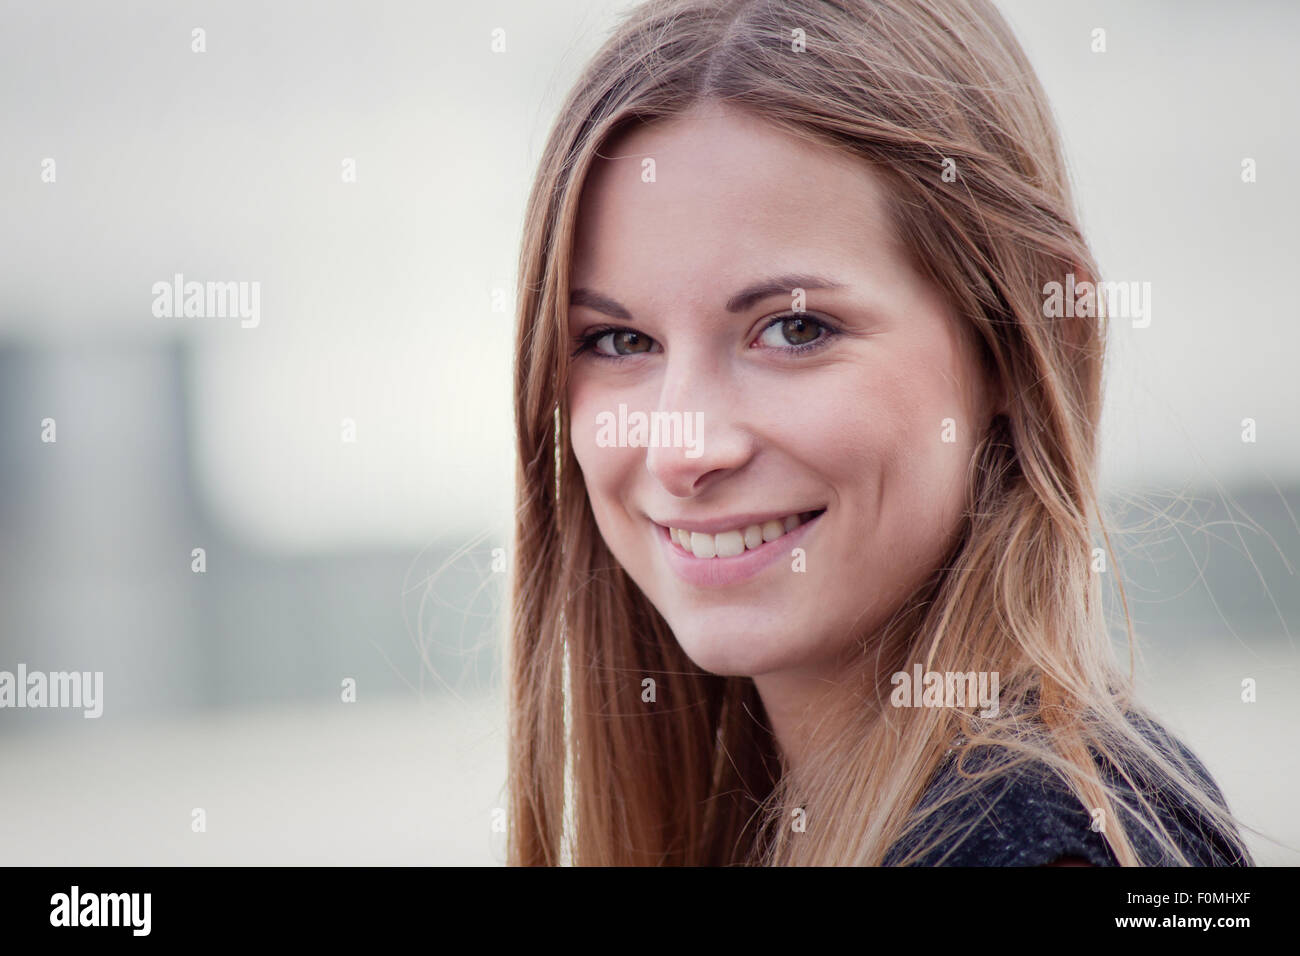 Face of an attractive girl Stock Photo